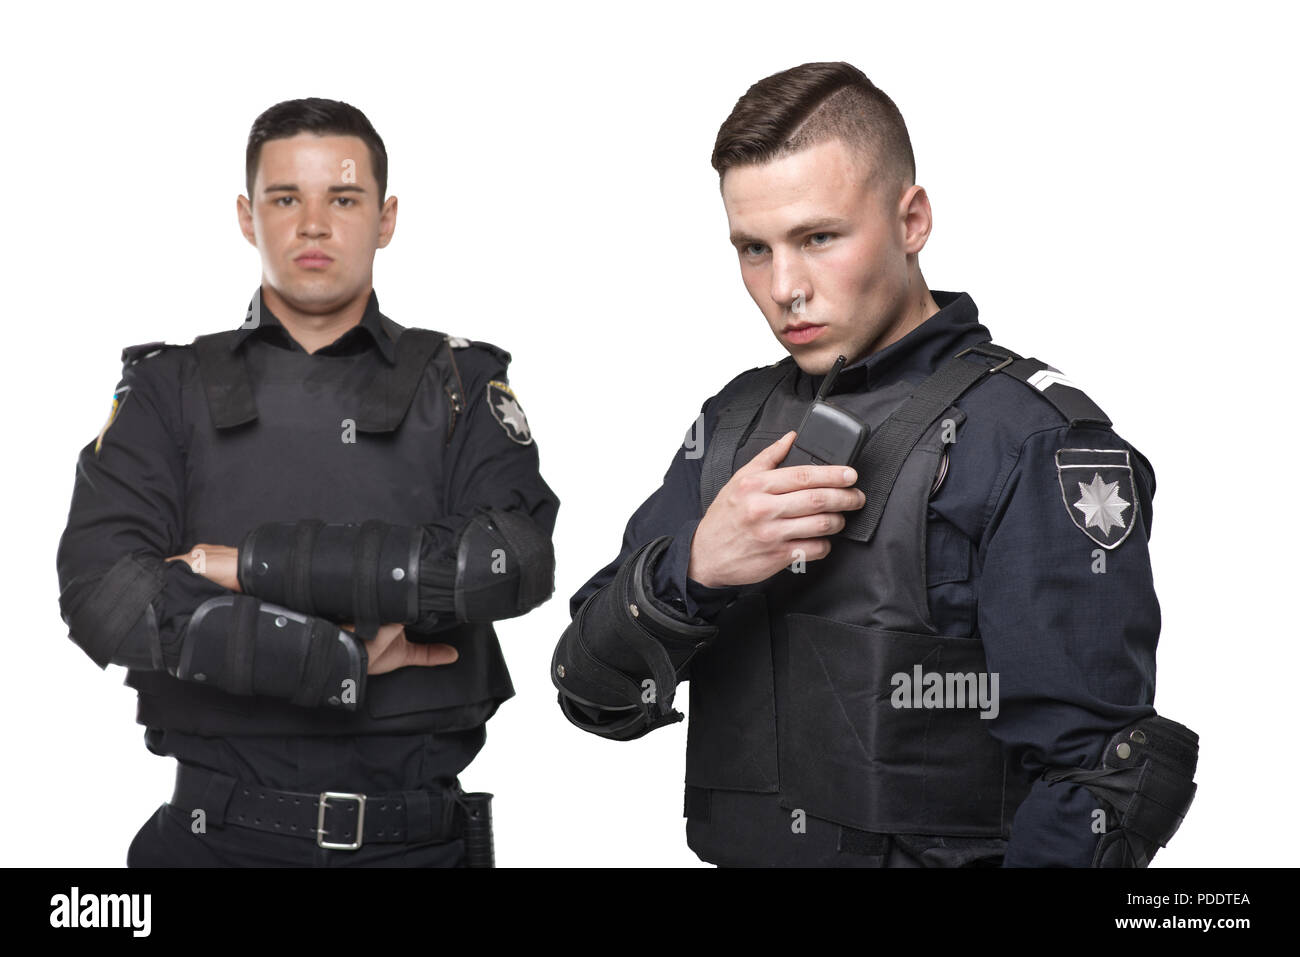 Cops in uniform and body armor on white background Stock Photo